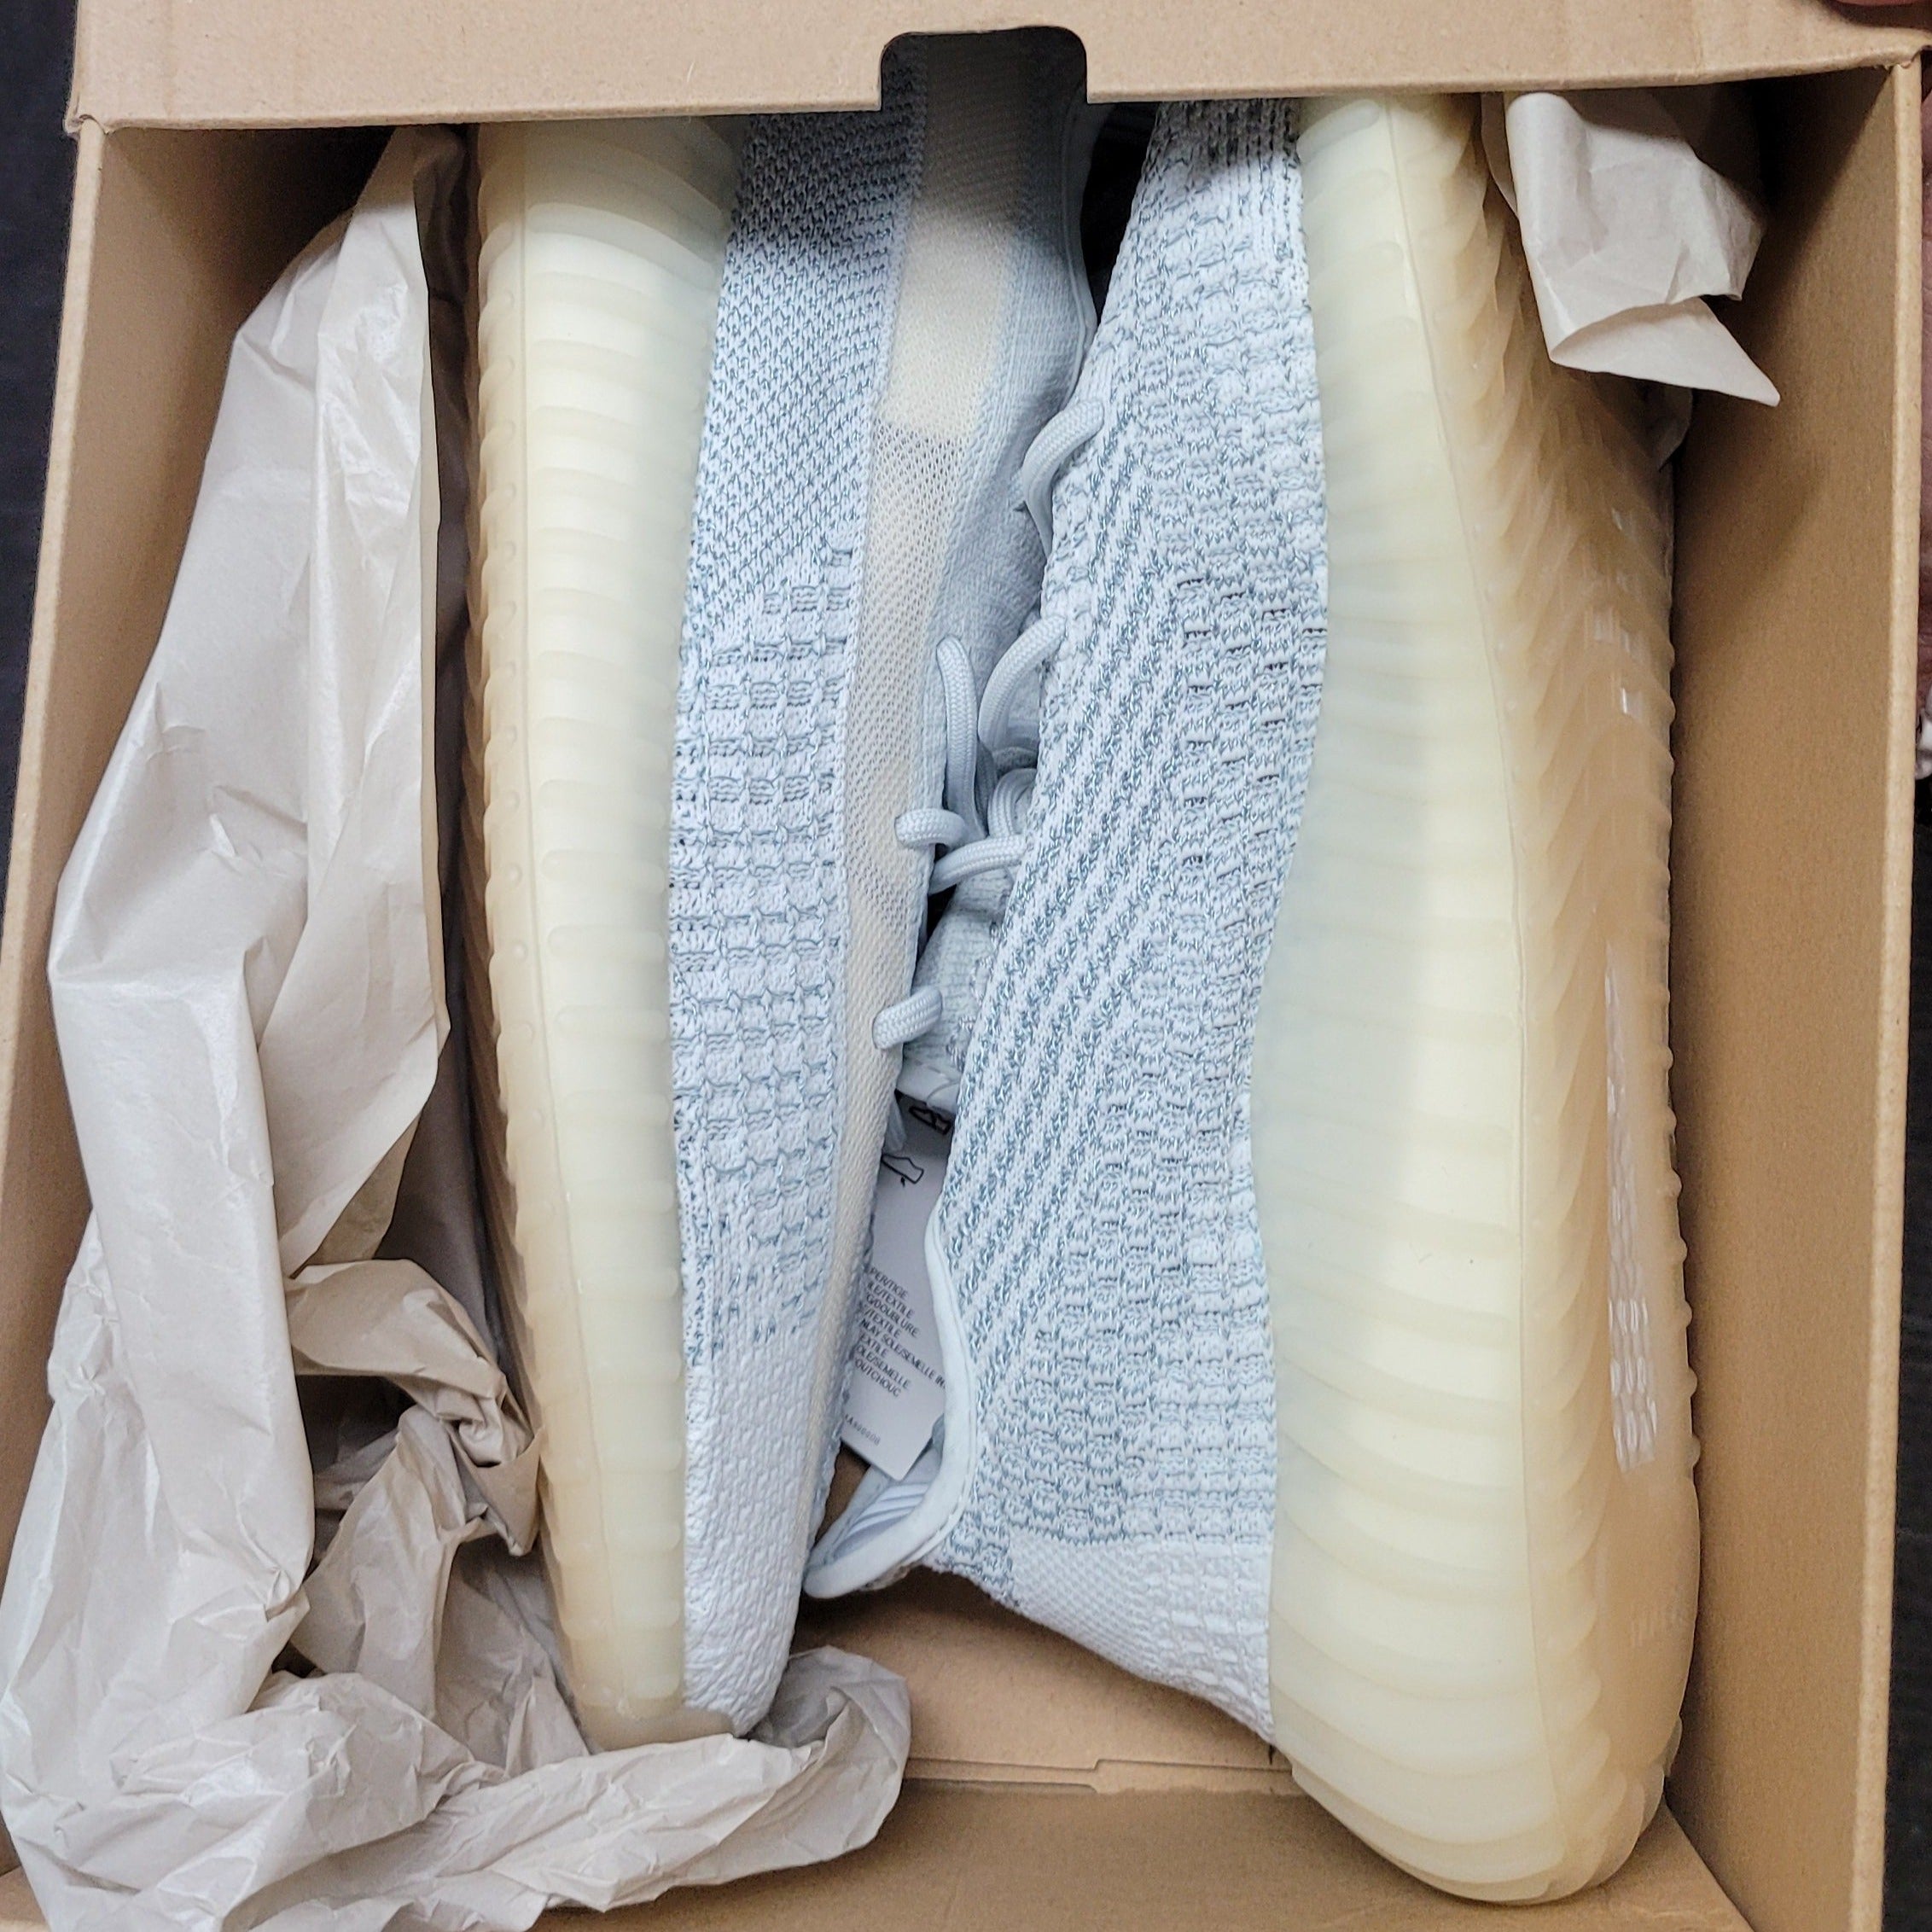 adidas Yeezy Boost 350 V2 Cloud White (Reflective) - Sole Premise